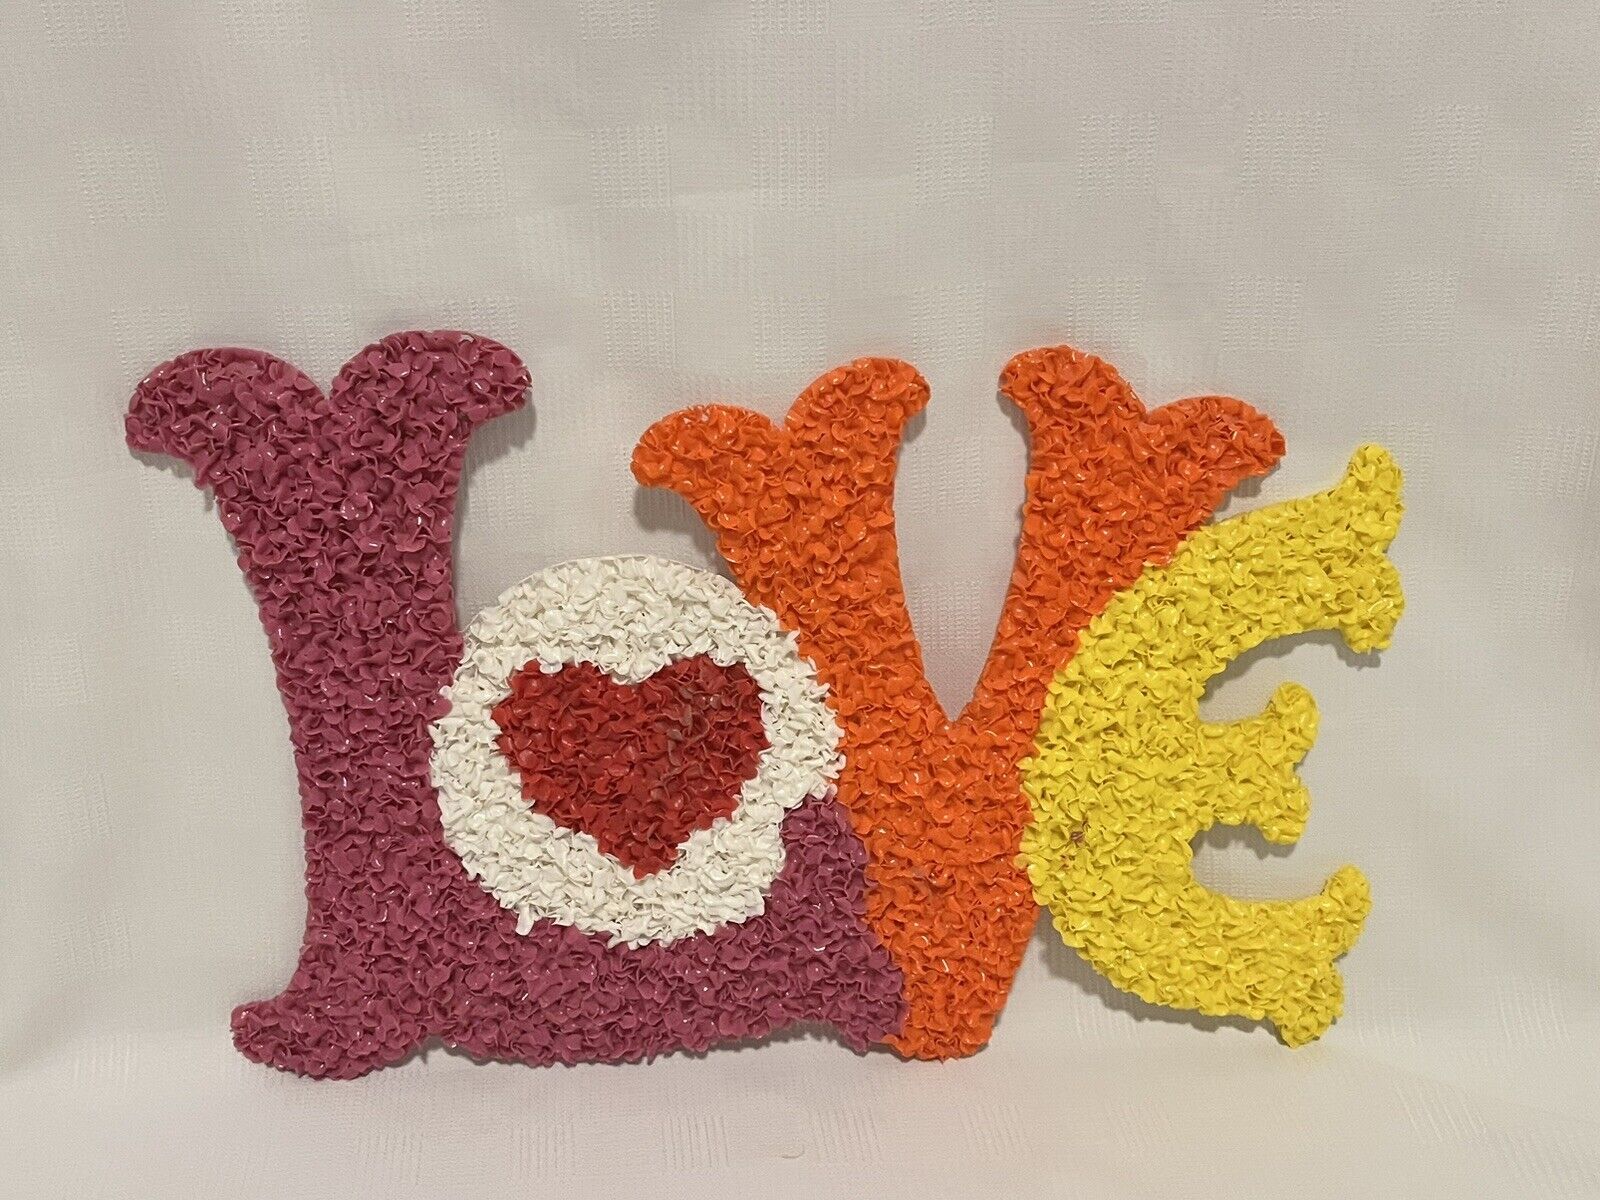 Vintage 1960’s 1970’s Groovy Love Melted Plastic Popcorn Wall Art Hanging Decor